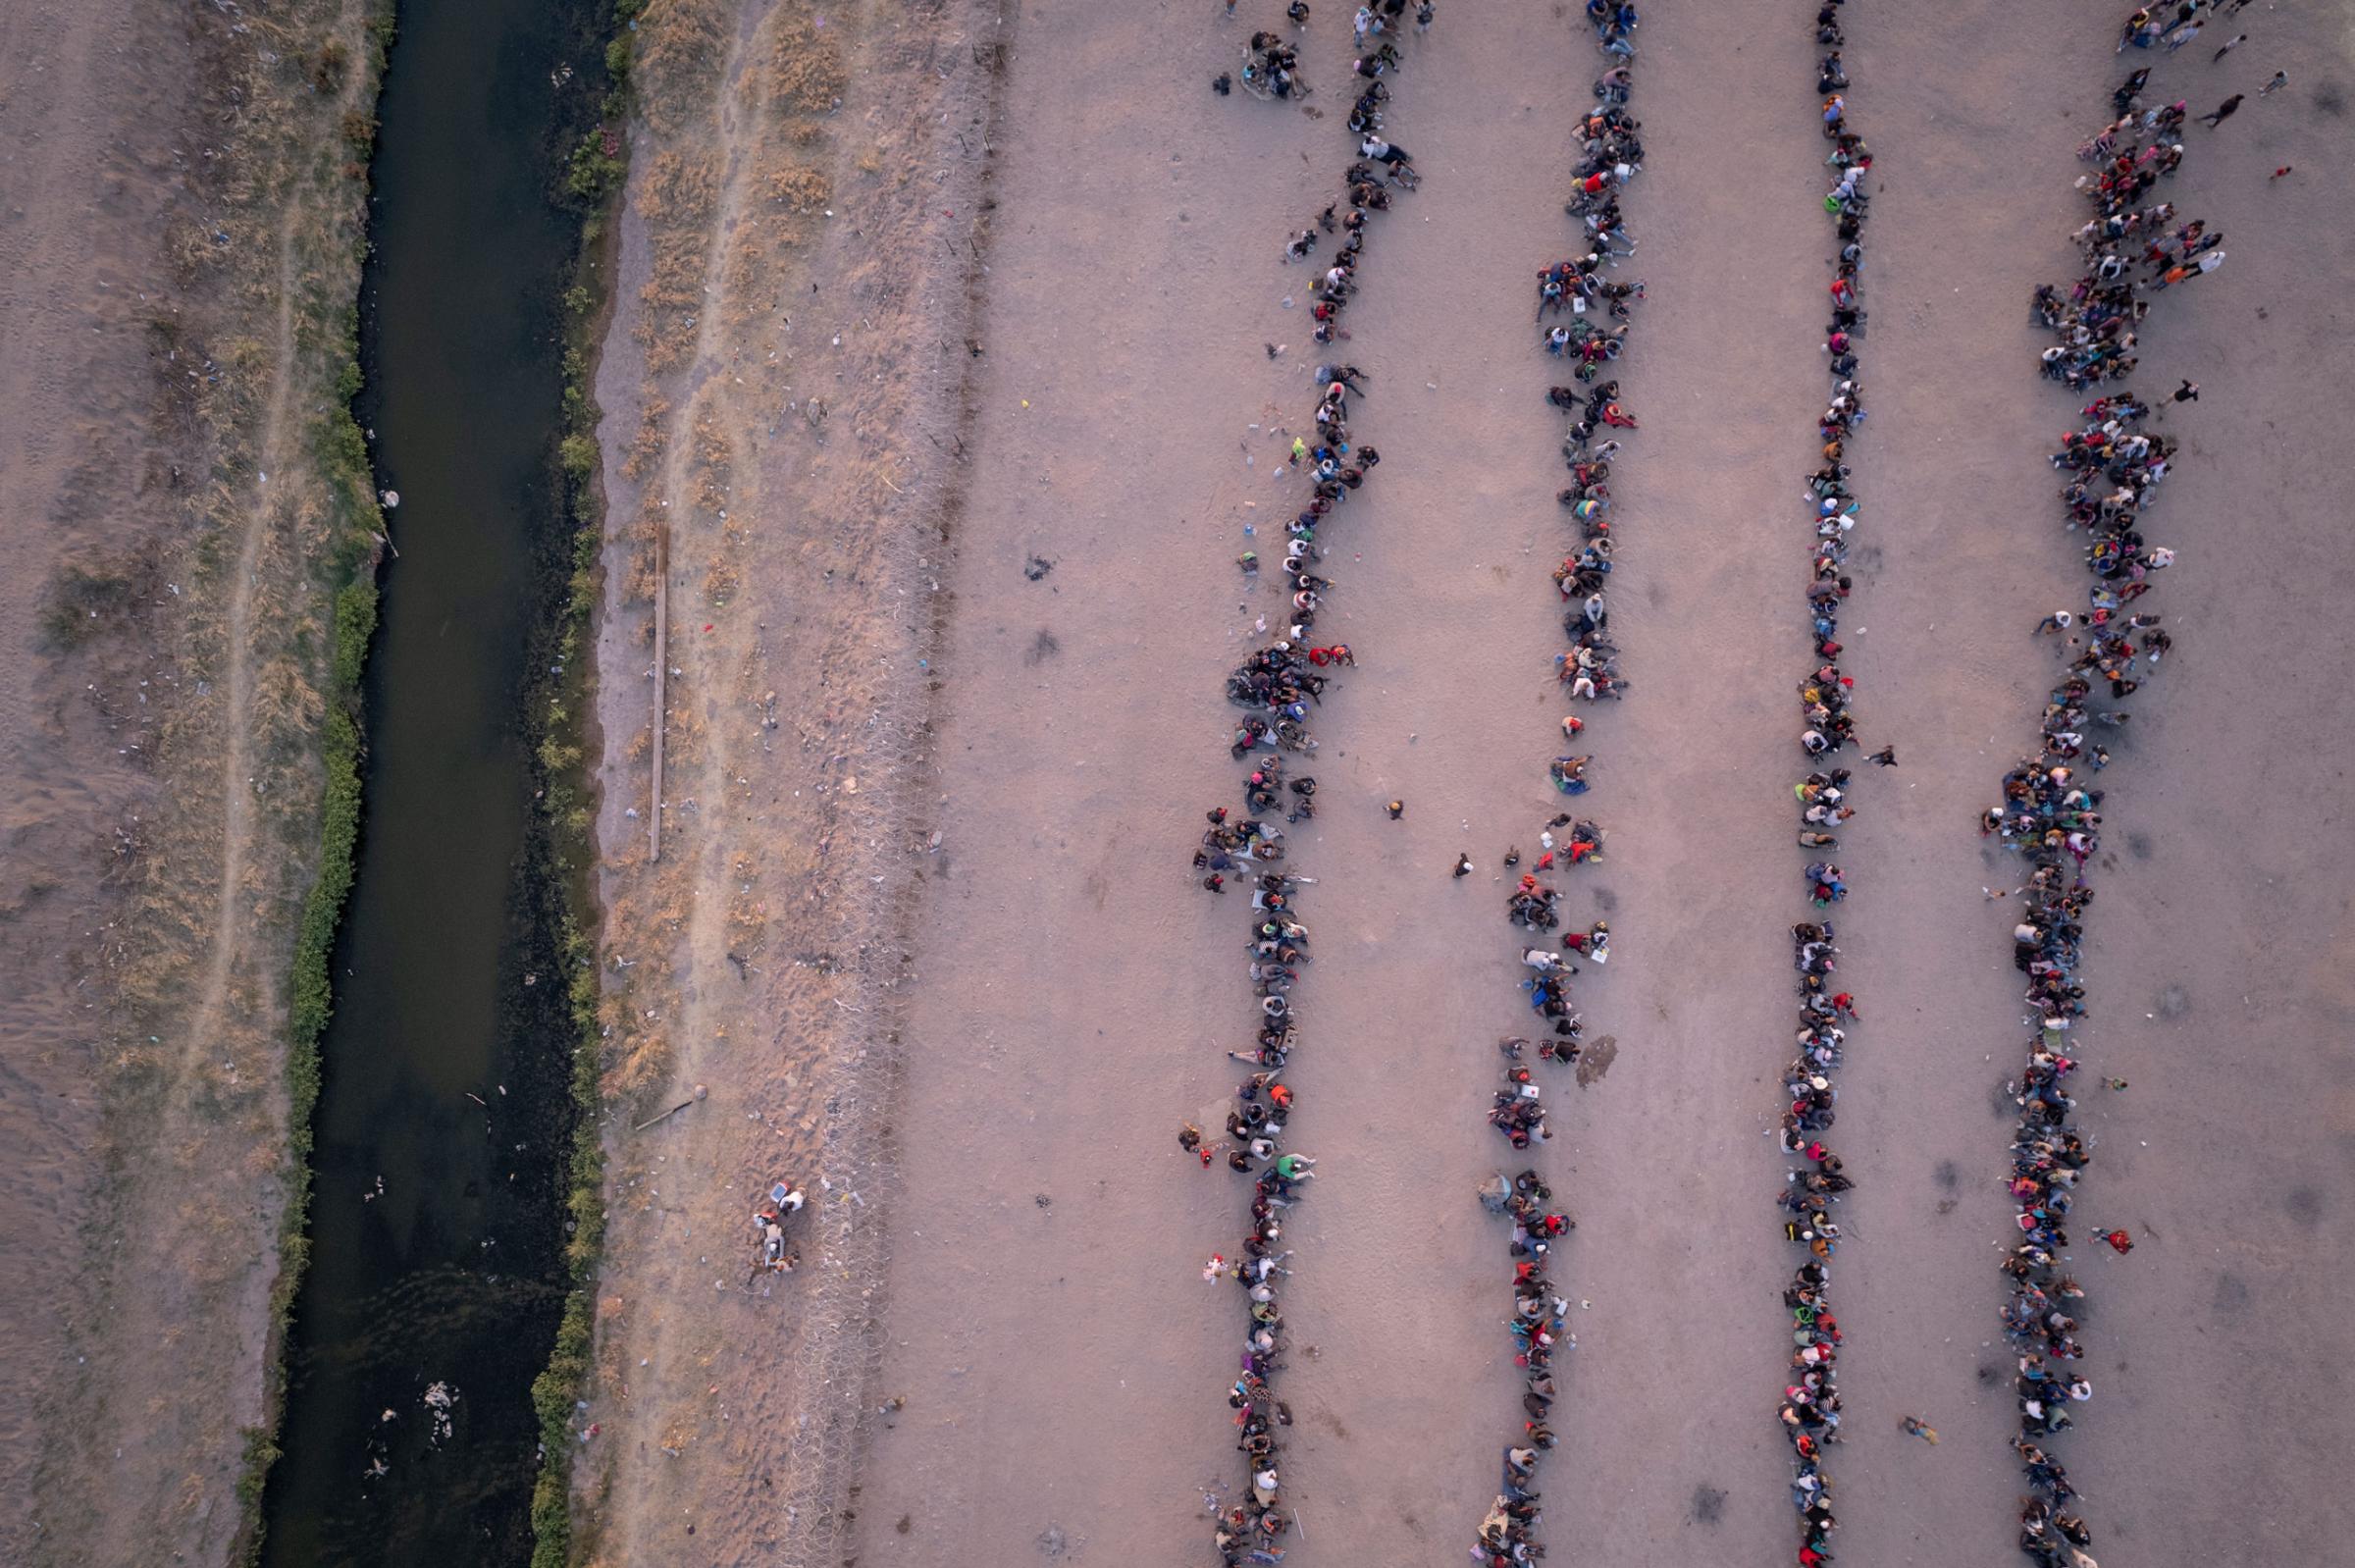 seen from an aerial view, immigrants wait to be processed to make asylum claims after crossing the Rio Grande from Mexico into El Paso, Texas